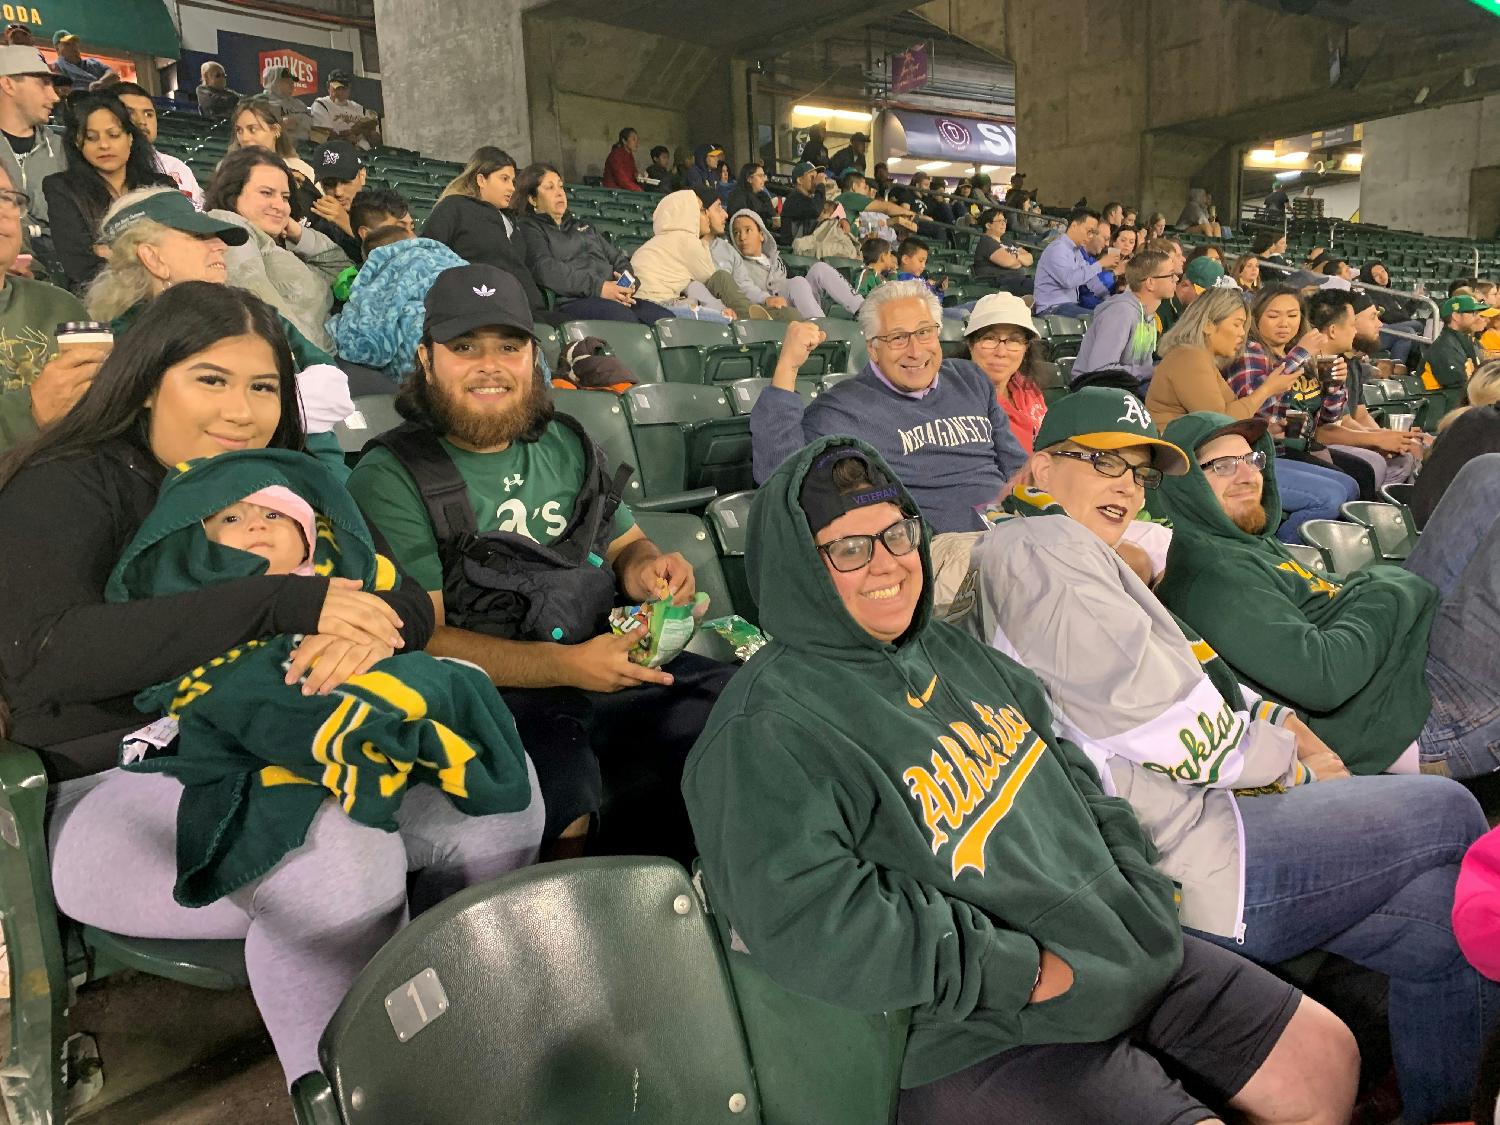 Some team members at an A’s Game